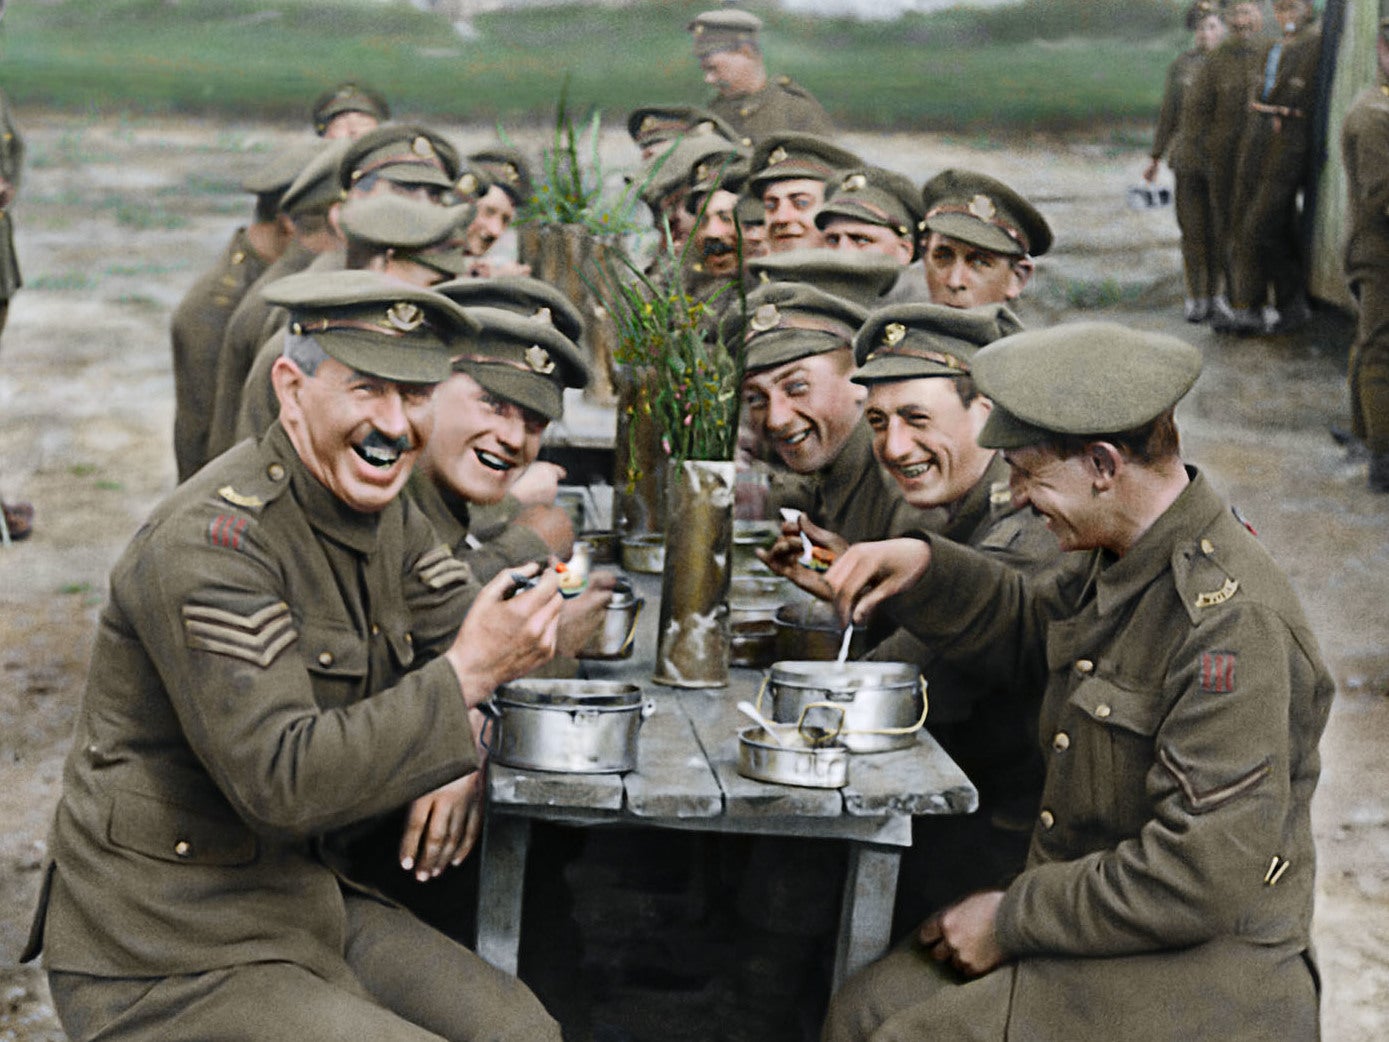 Peter Jackson and Philippa Boyens’s WW1 documentary ‘They Shall Not Grow Old’